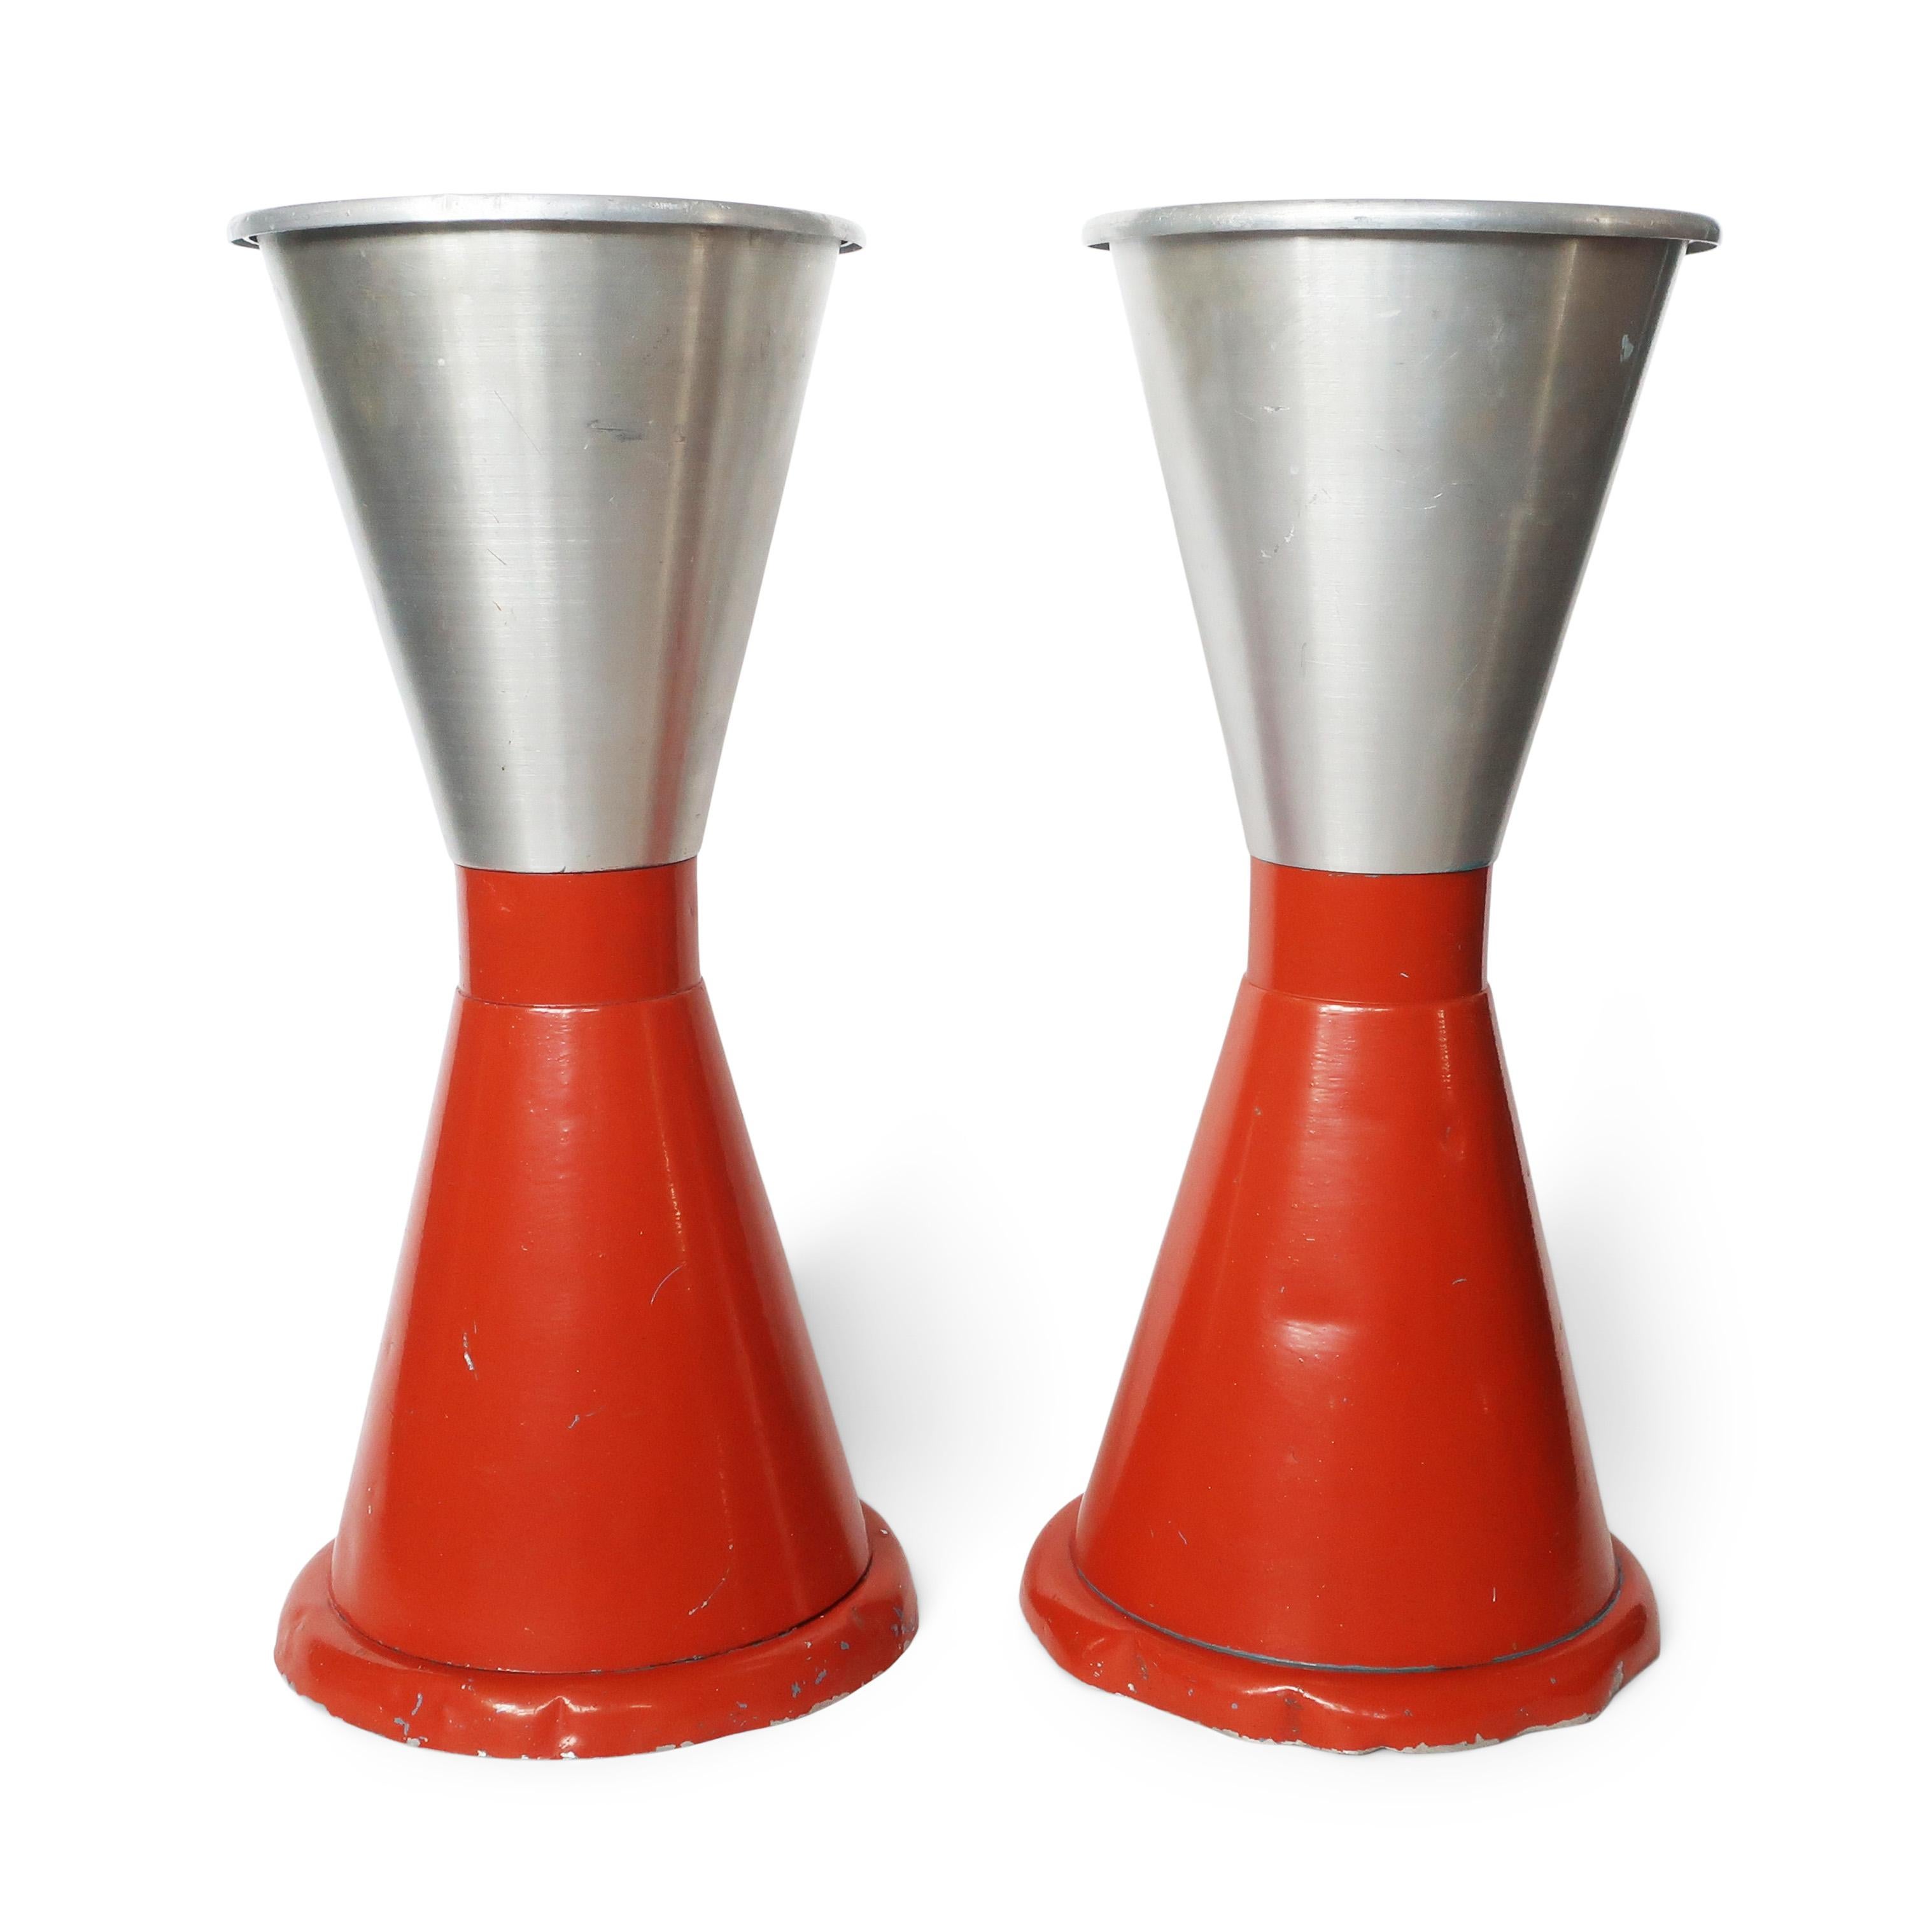 A sensational pair of Art Deco or early mid-century modern standing ashtrays.  Hourglass shaped with an orange enameled base, aluminum top, and original removable chrome trays that collect accumulated ash.   Subtle and minimalist yet full of